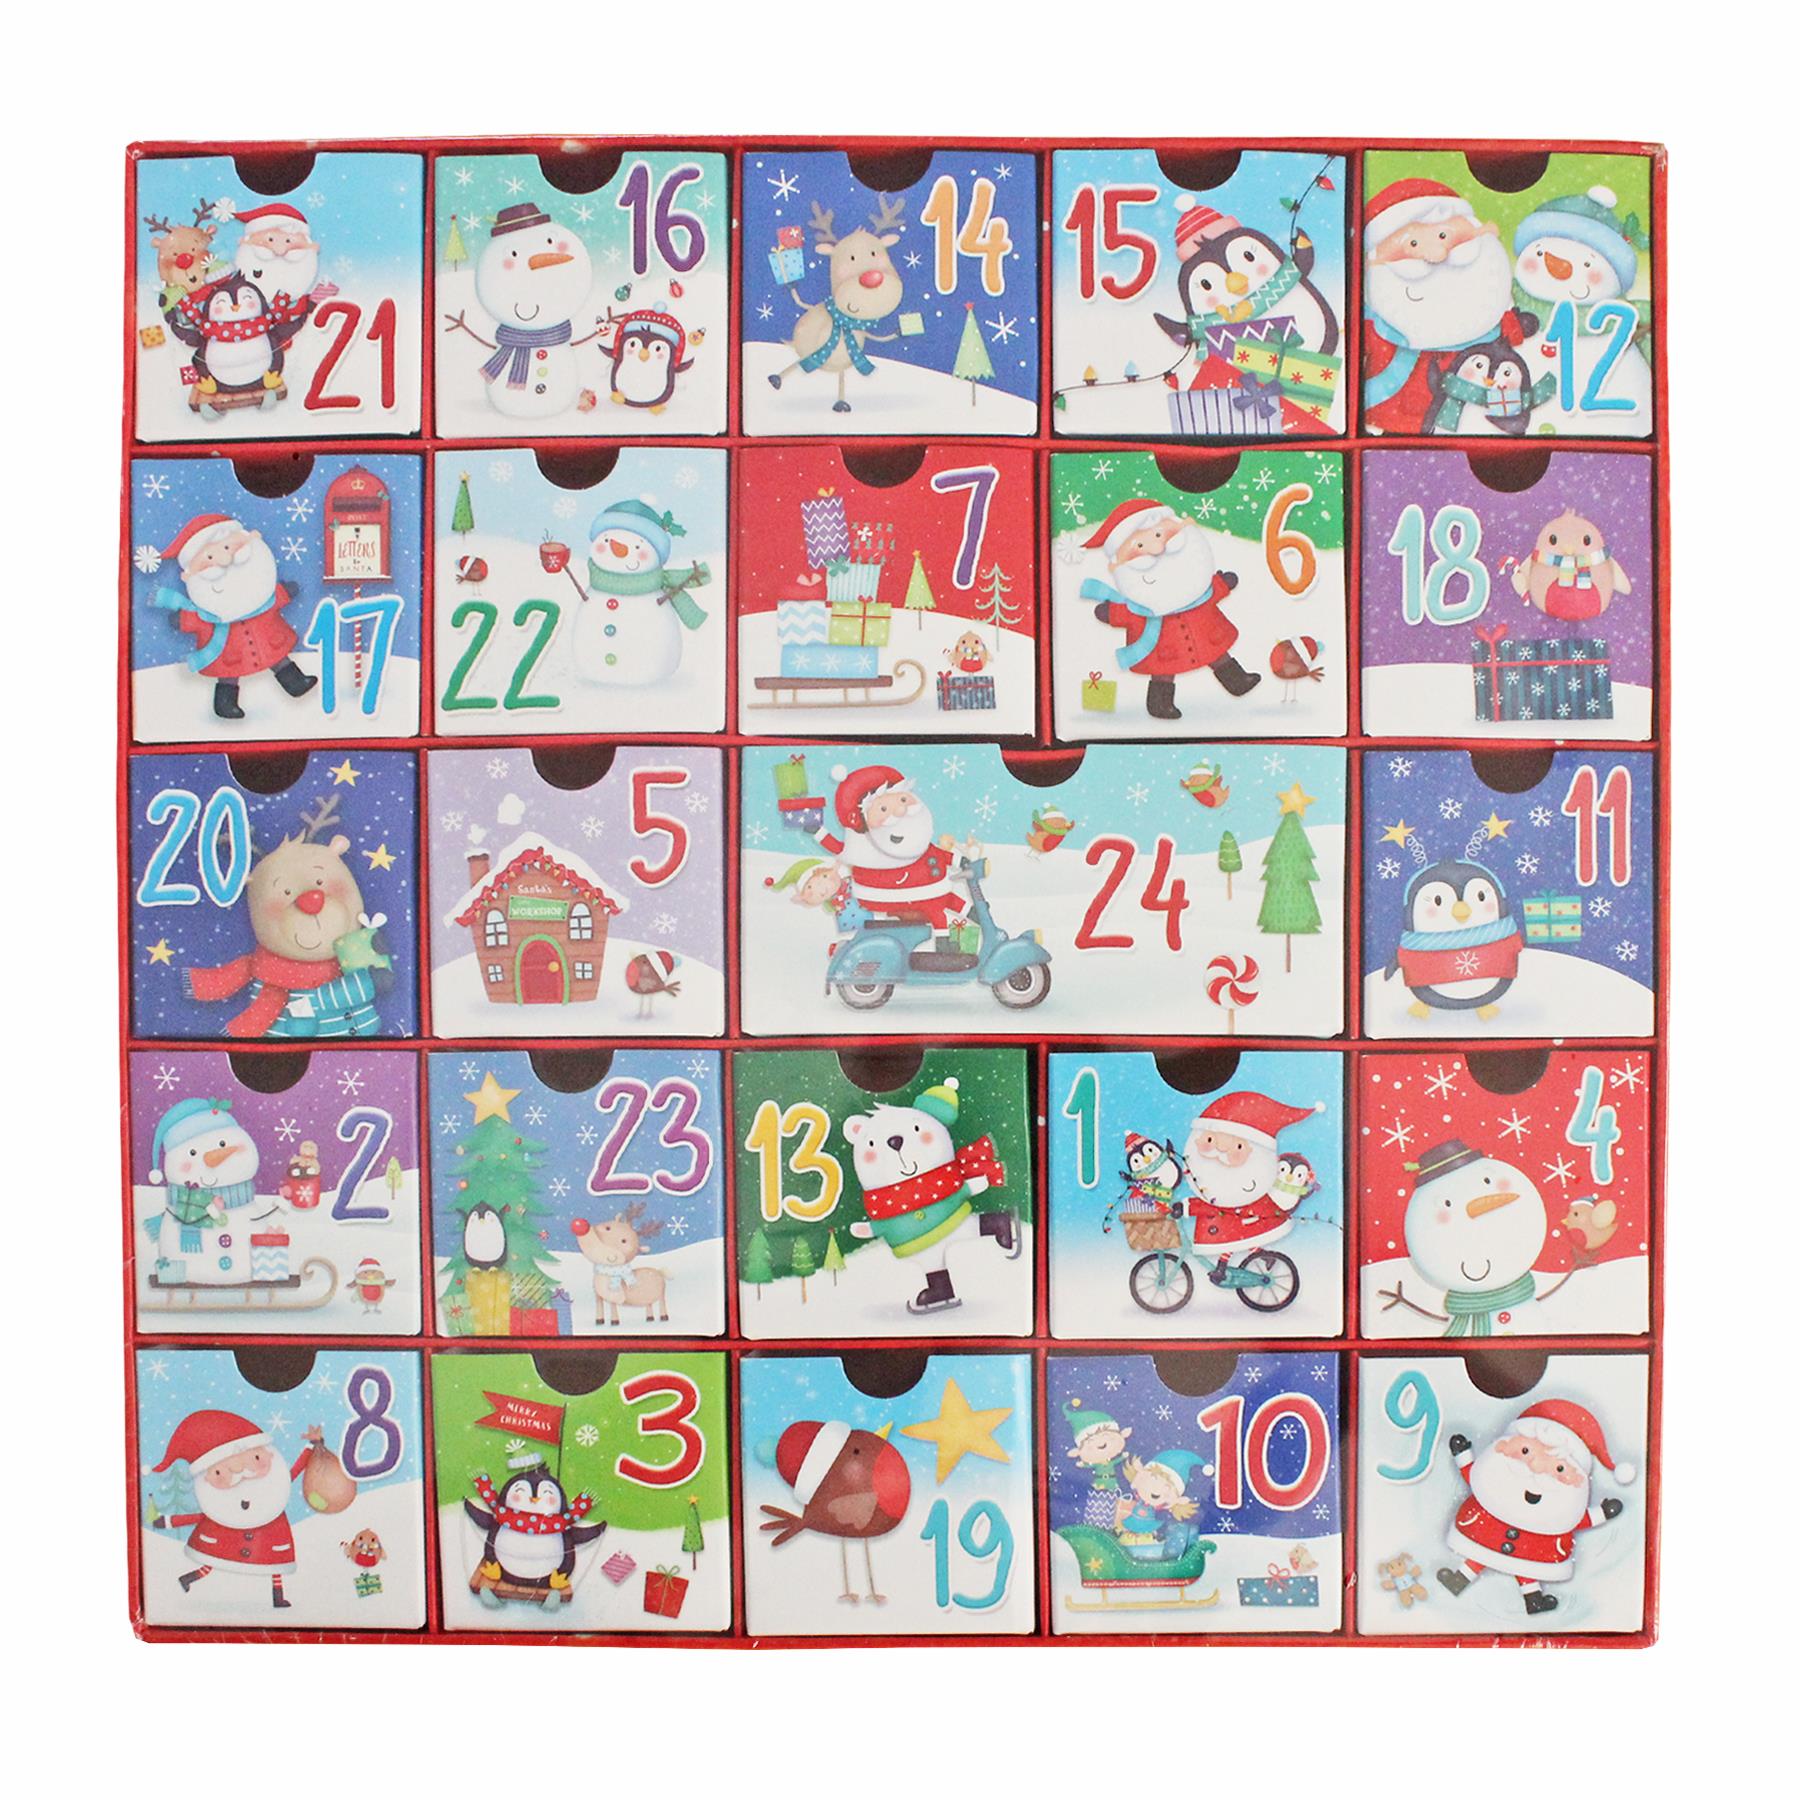 Christmas Advent Calendar with 24 Drawers - Add your own Treats